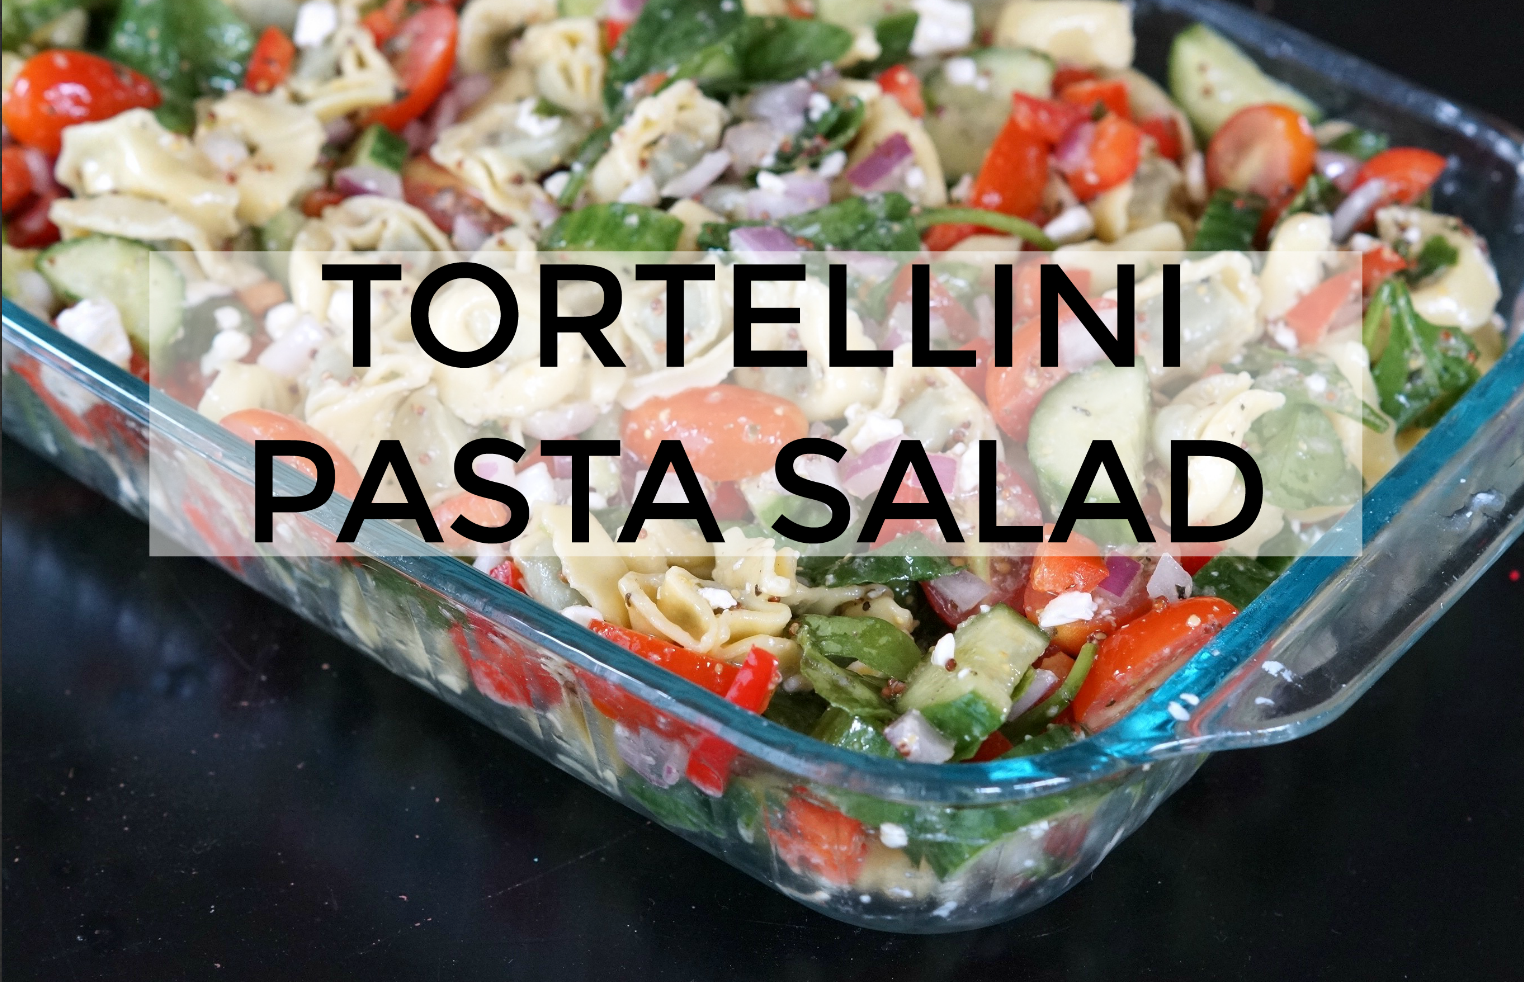 Looking for the perfect dish for a pot luck that doesn't require a lot of time in the kitchen? Bring this crowd-pleasing tortellini pasta salad.